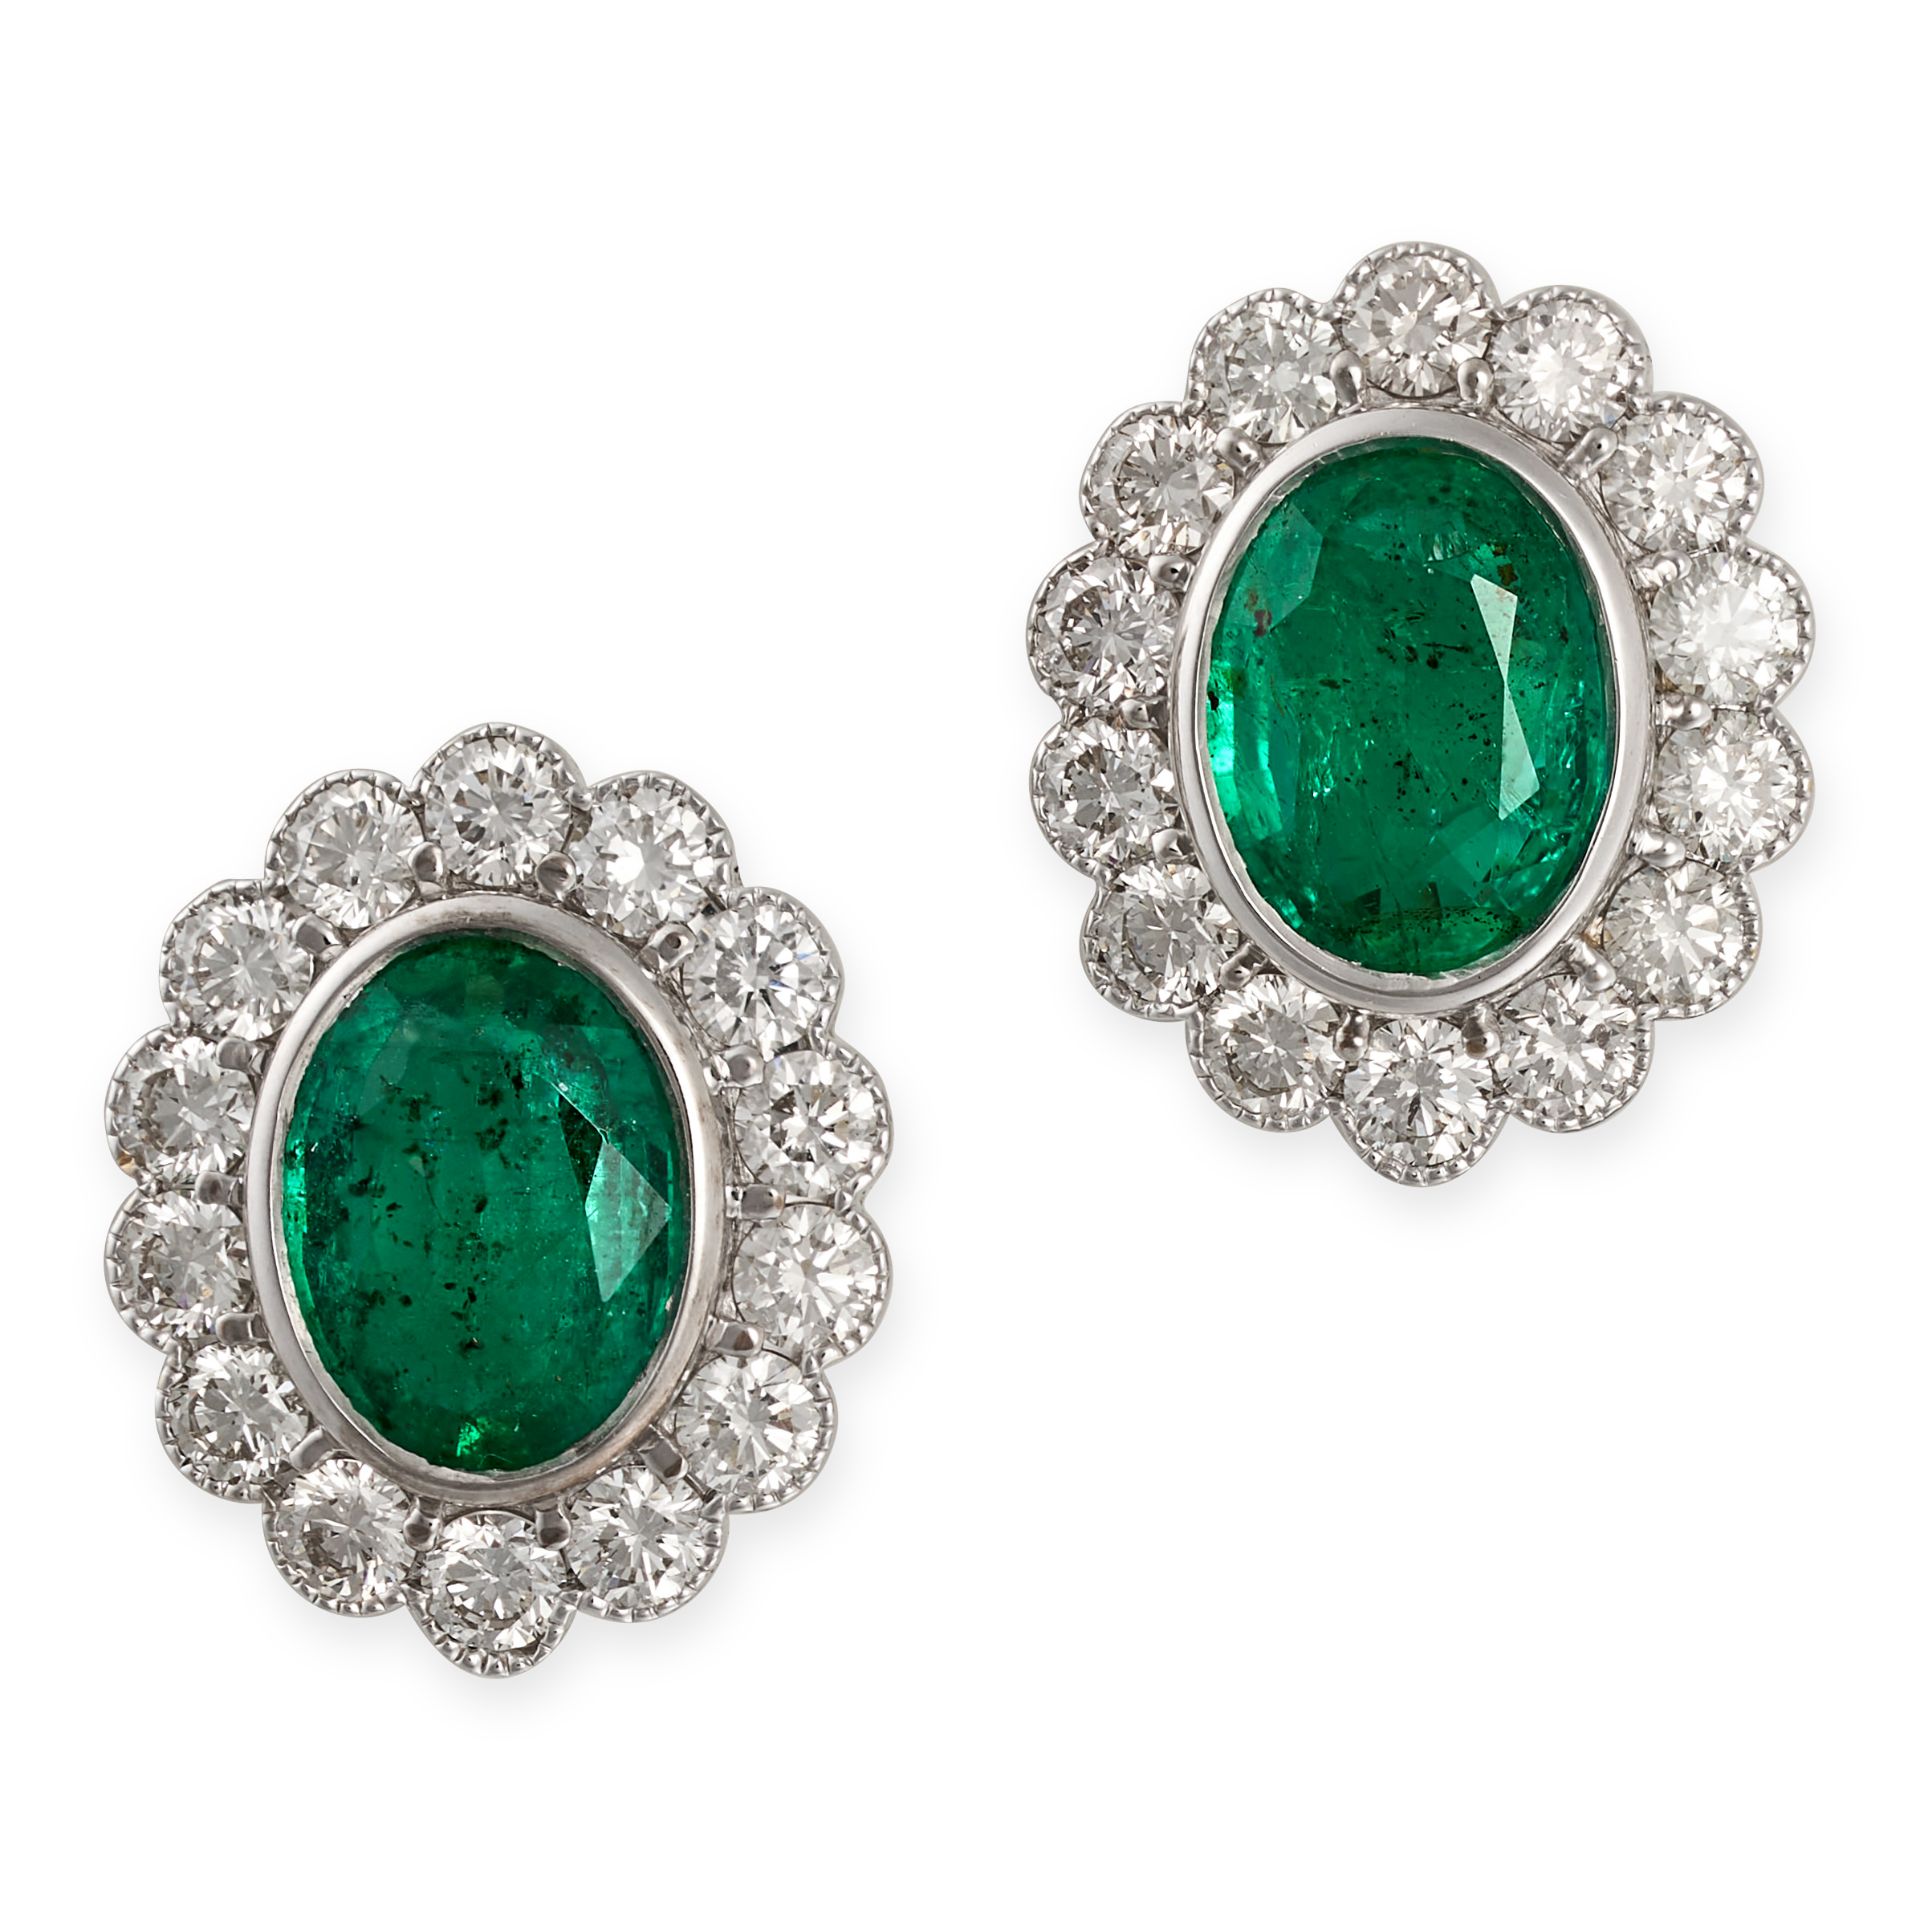 A PAIR OF EMERALD AND DIAMOND CLUSTER EARRINGS in white gold, each set with an oval cut emerald i...